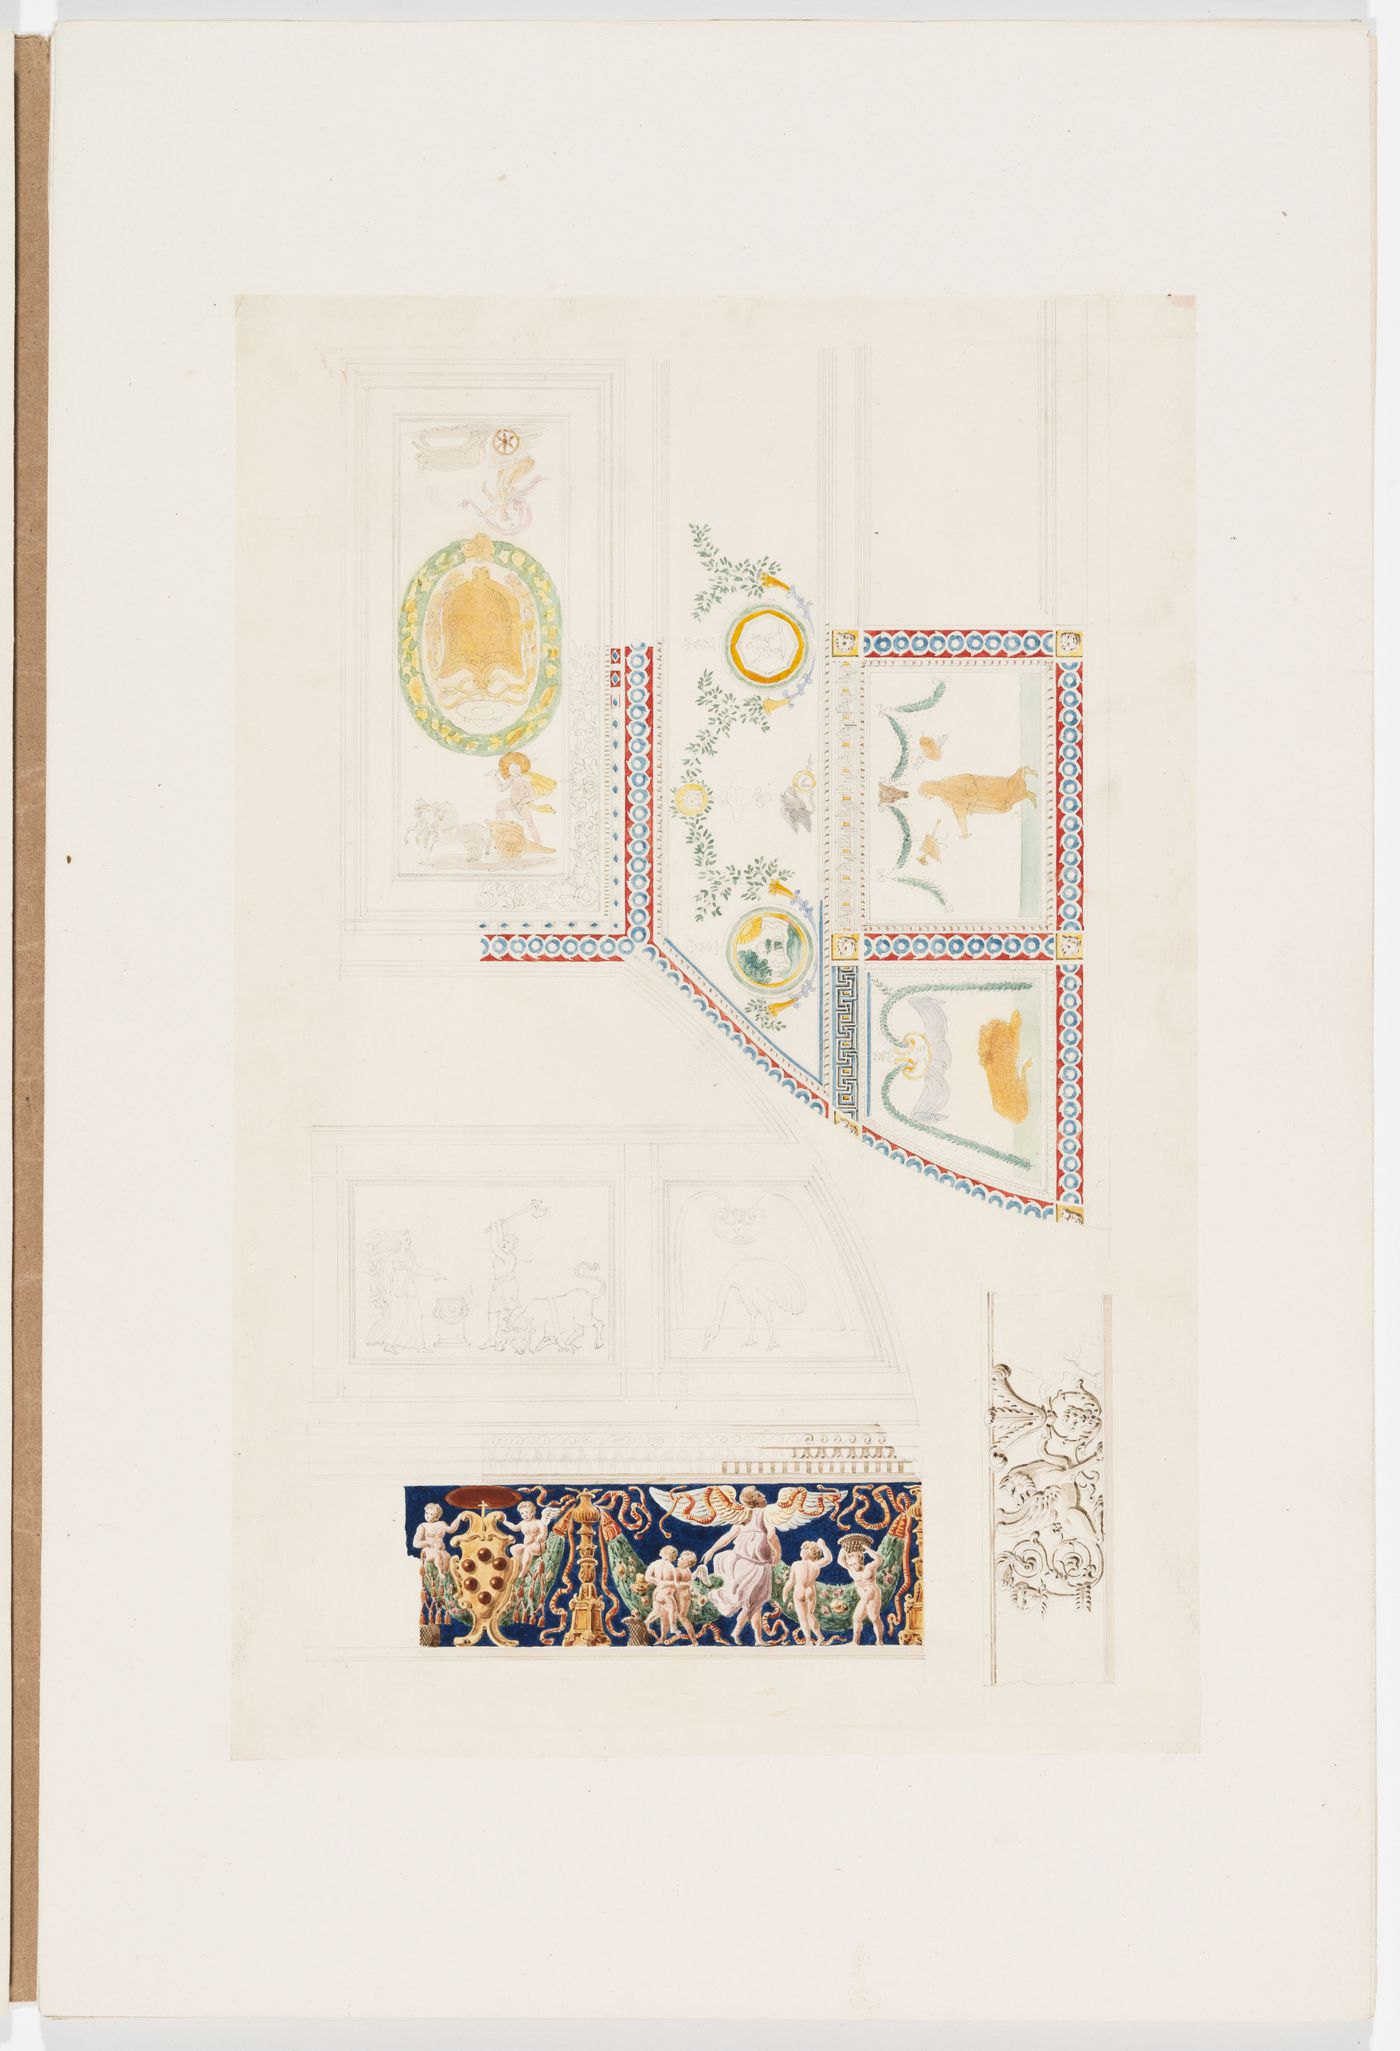 Ornament drawing of panels and bands with figurative and foliated ornament including the coat of arms of the Medici family, surrounded by decorated moldings and borders, probably for wall and ceiling panels, and a piece of a band decorated with grotesques